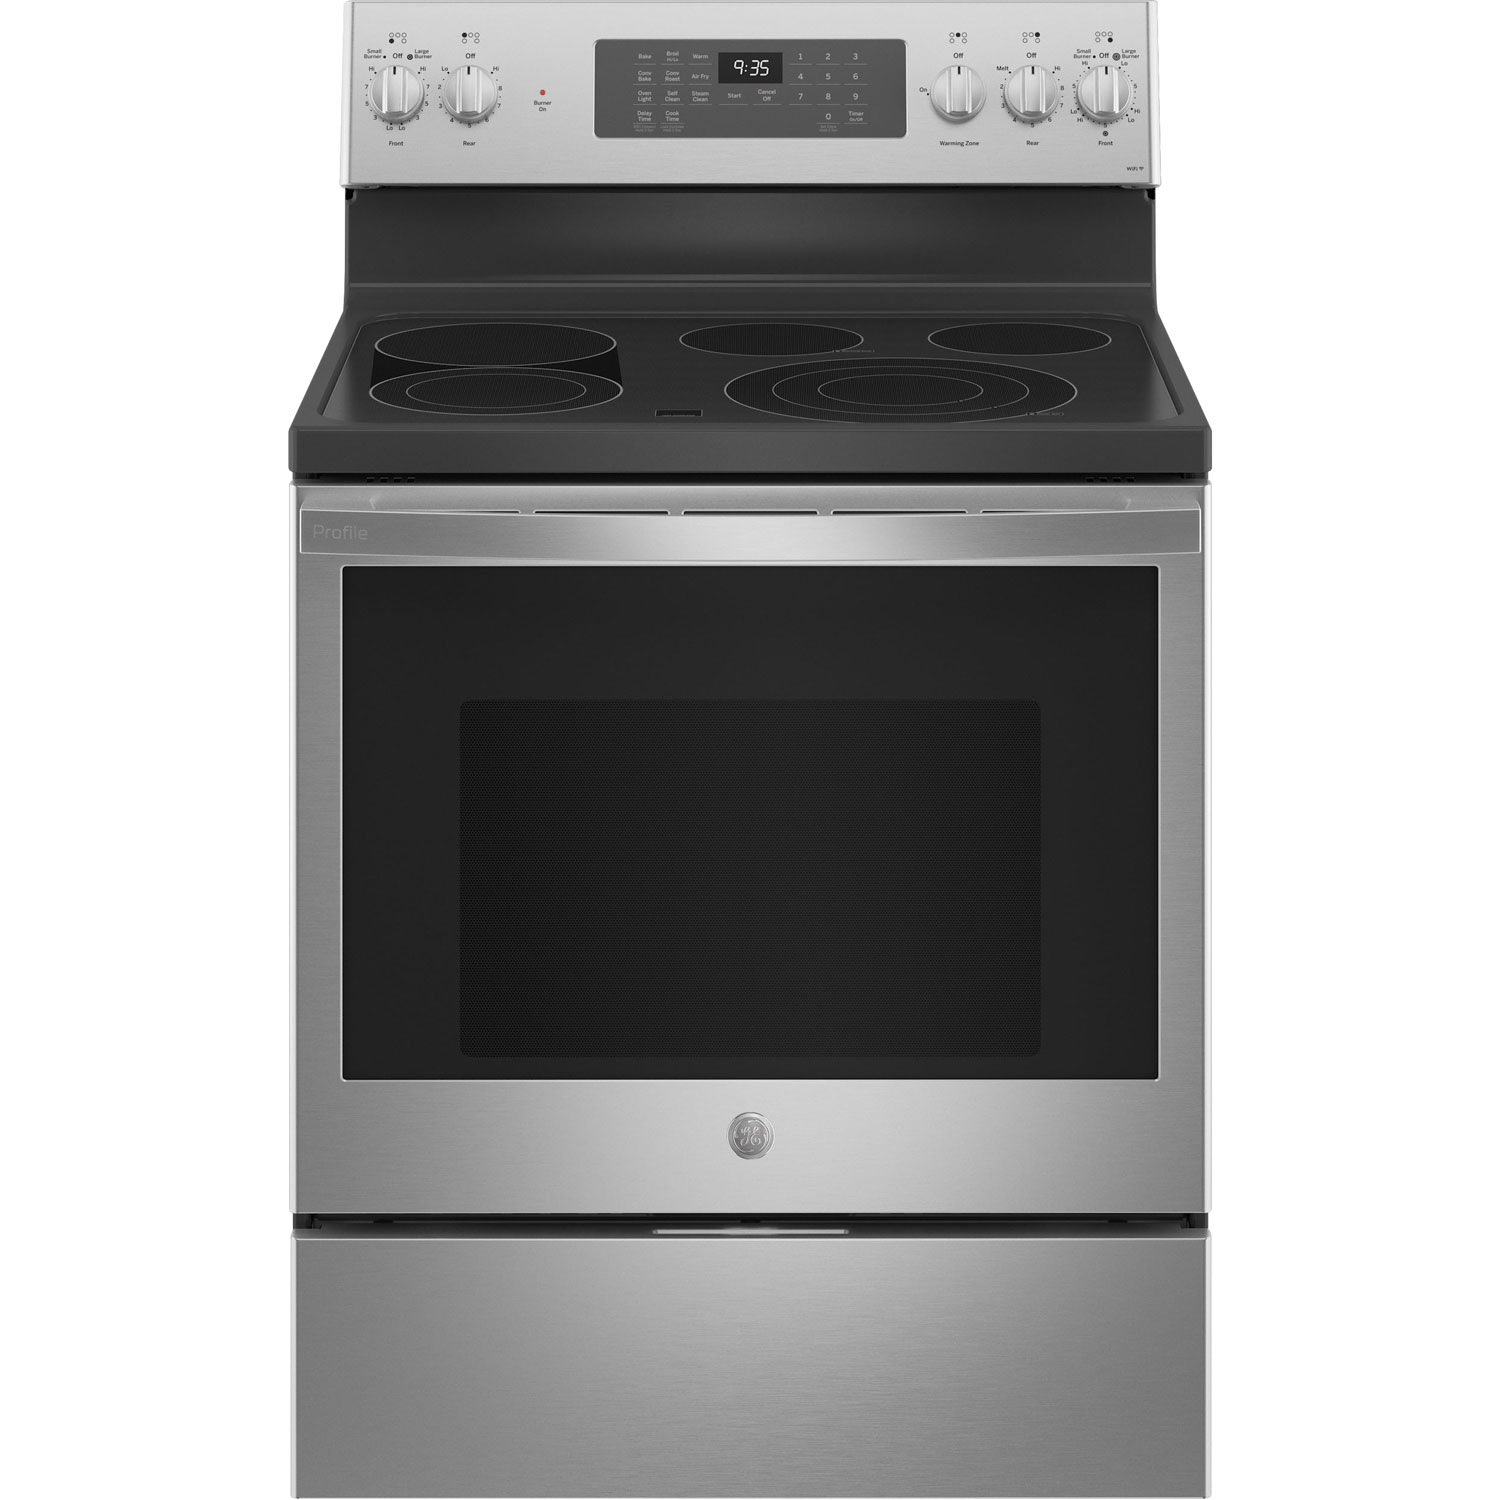 GE Profile 30" 5.3 Cu. Ft. True Convection Freestanding Electric Air Fry Range (PB935YPFS) - Stainless